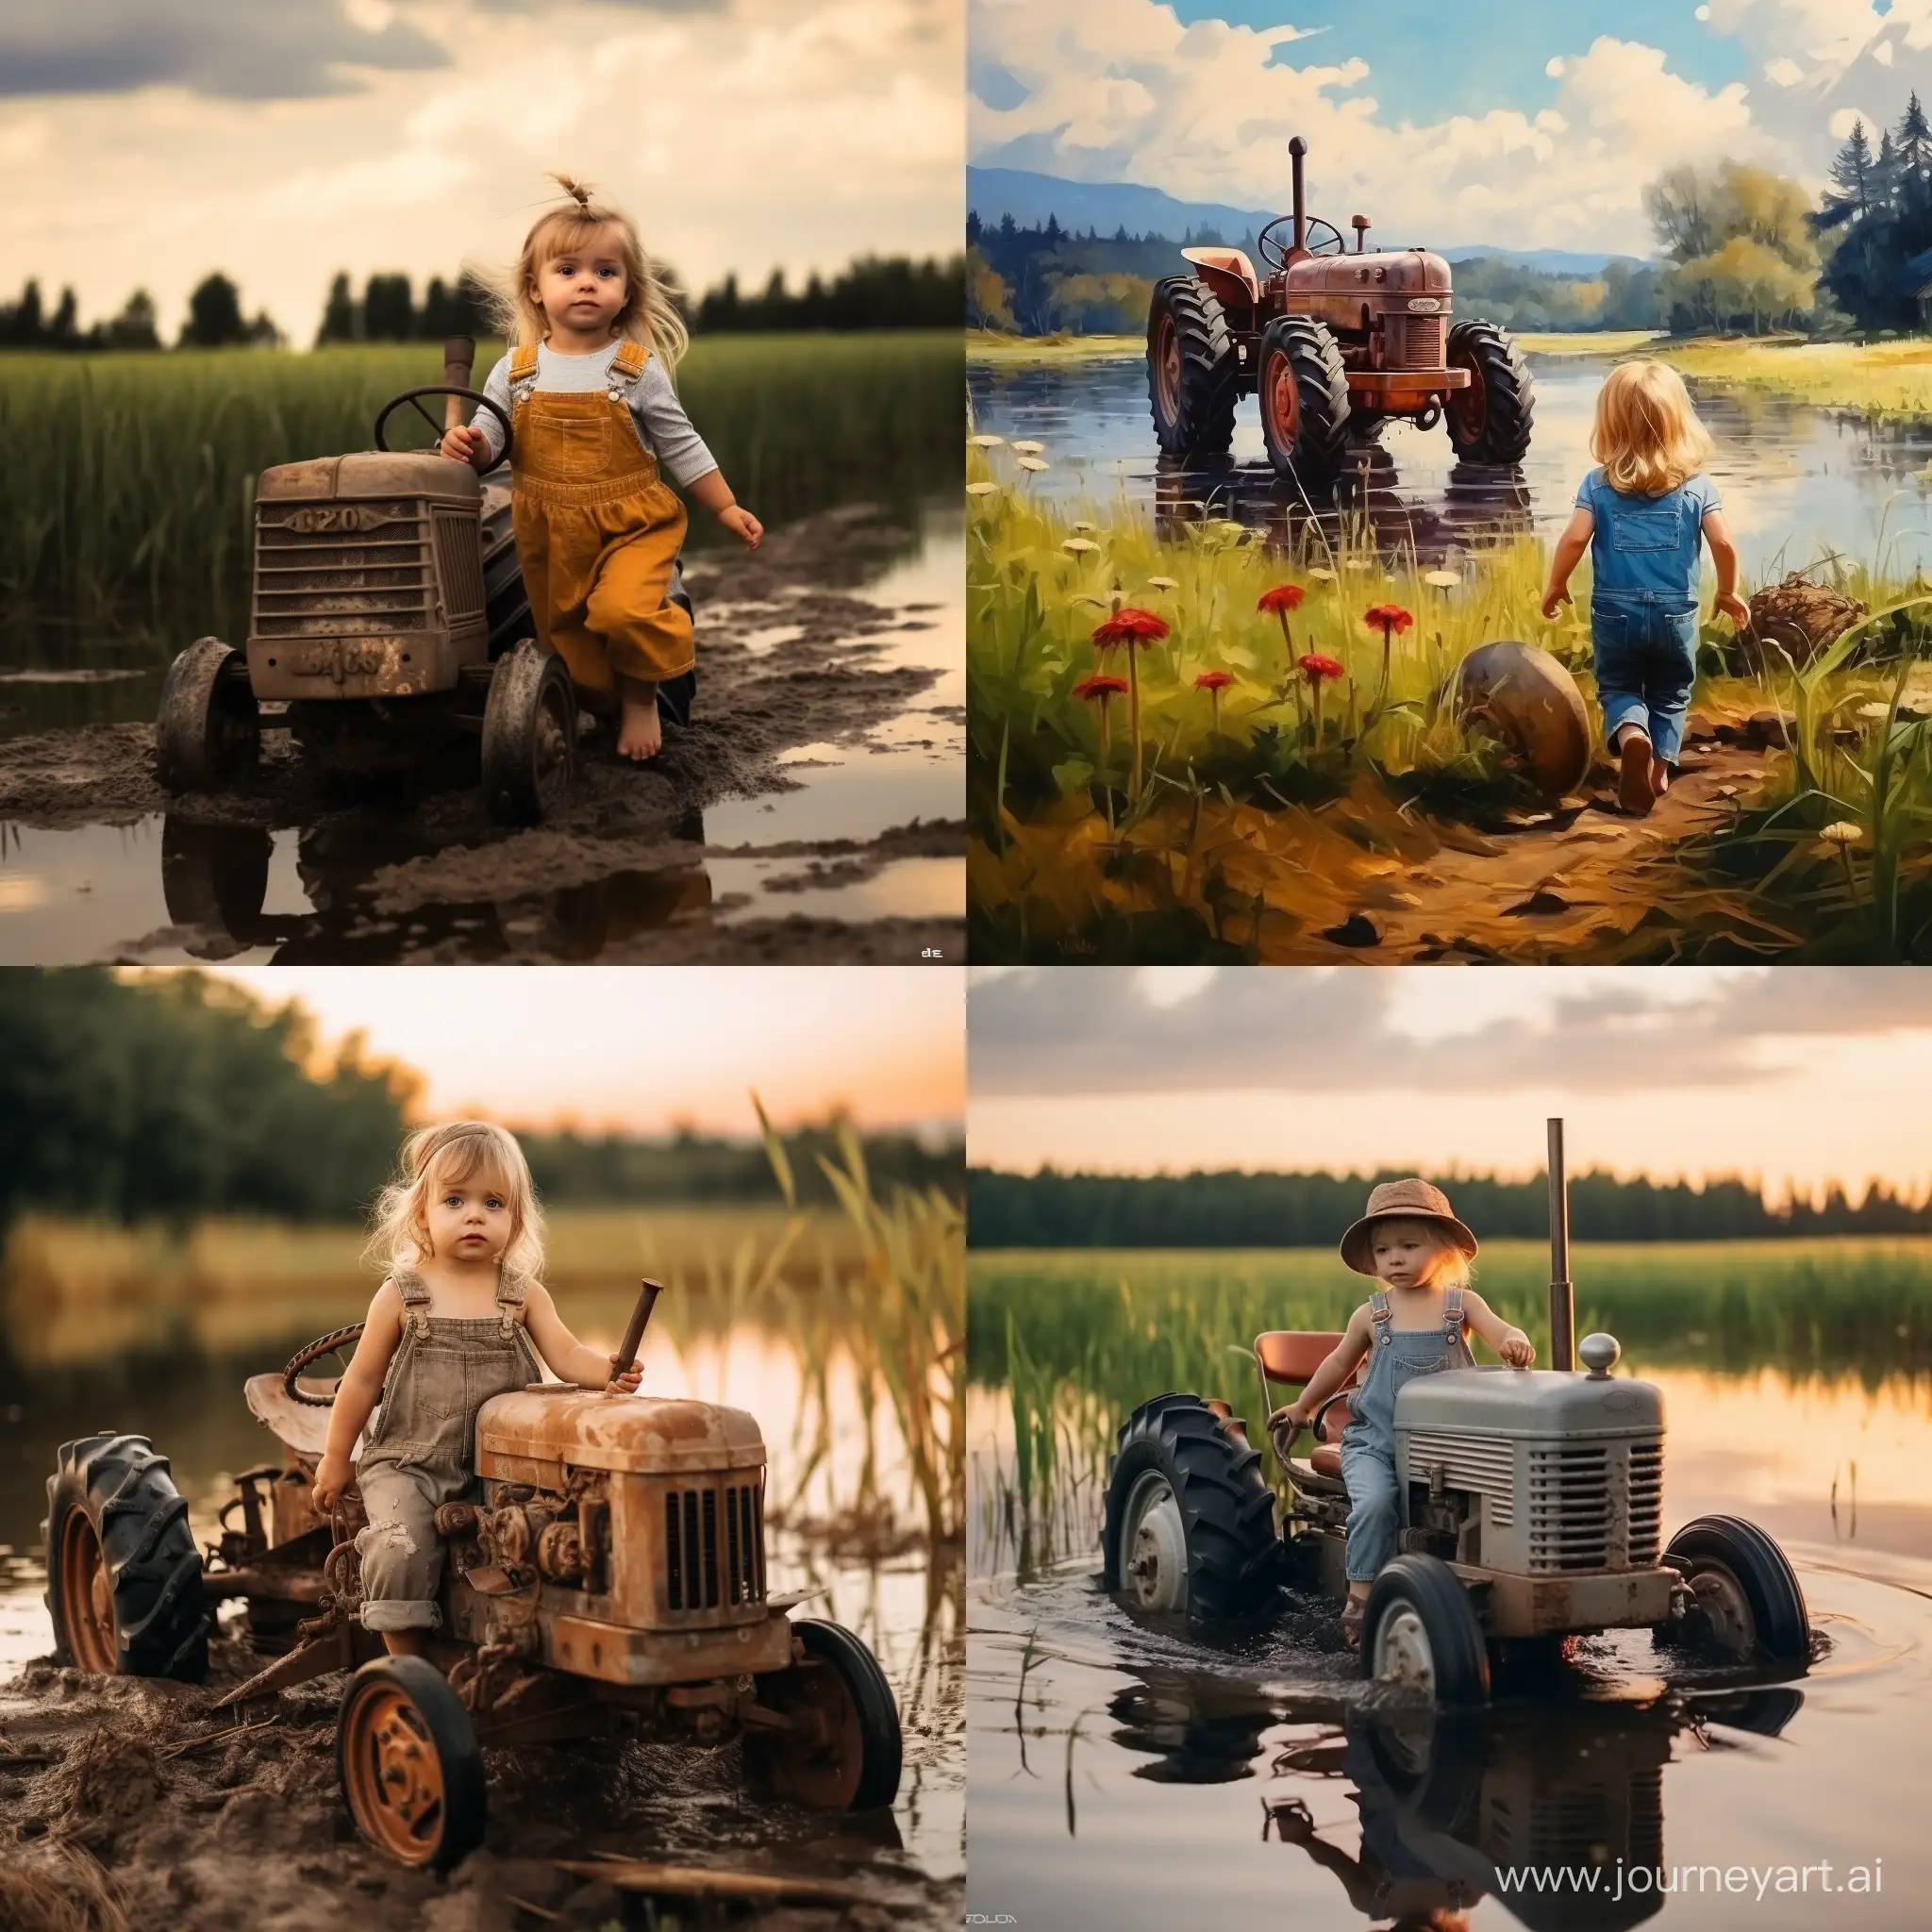 Adventurous-2YearOld-Explores-Lakeside-with-Tractor-and-Airplane